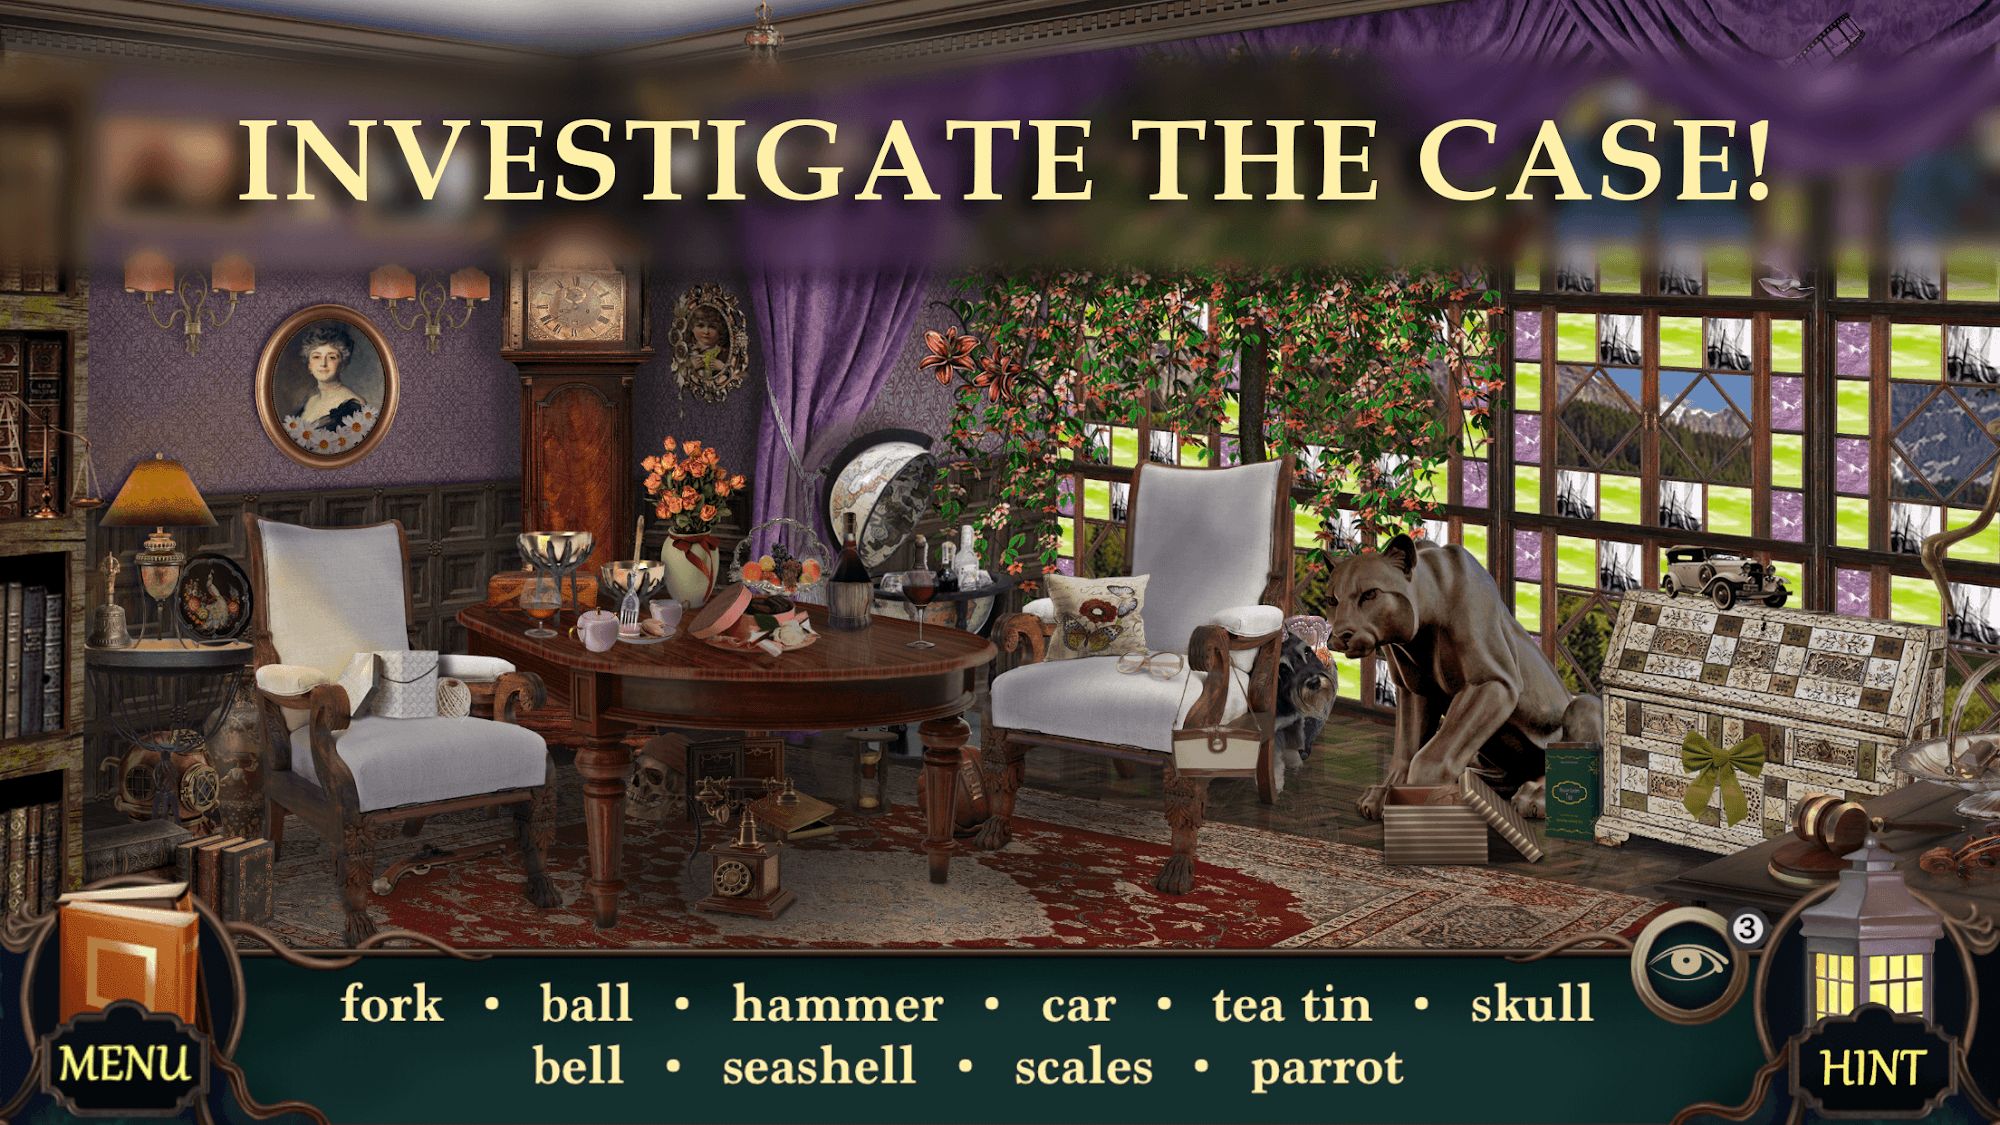 Descargar Mystery Hotel - Seek and Find Hidden Objects Games gratis para Android.